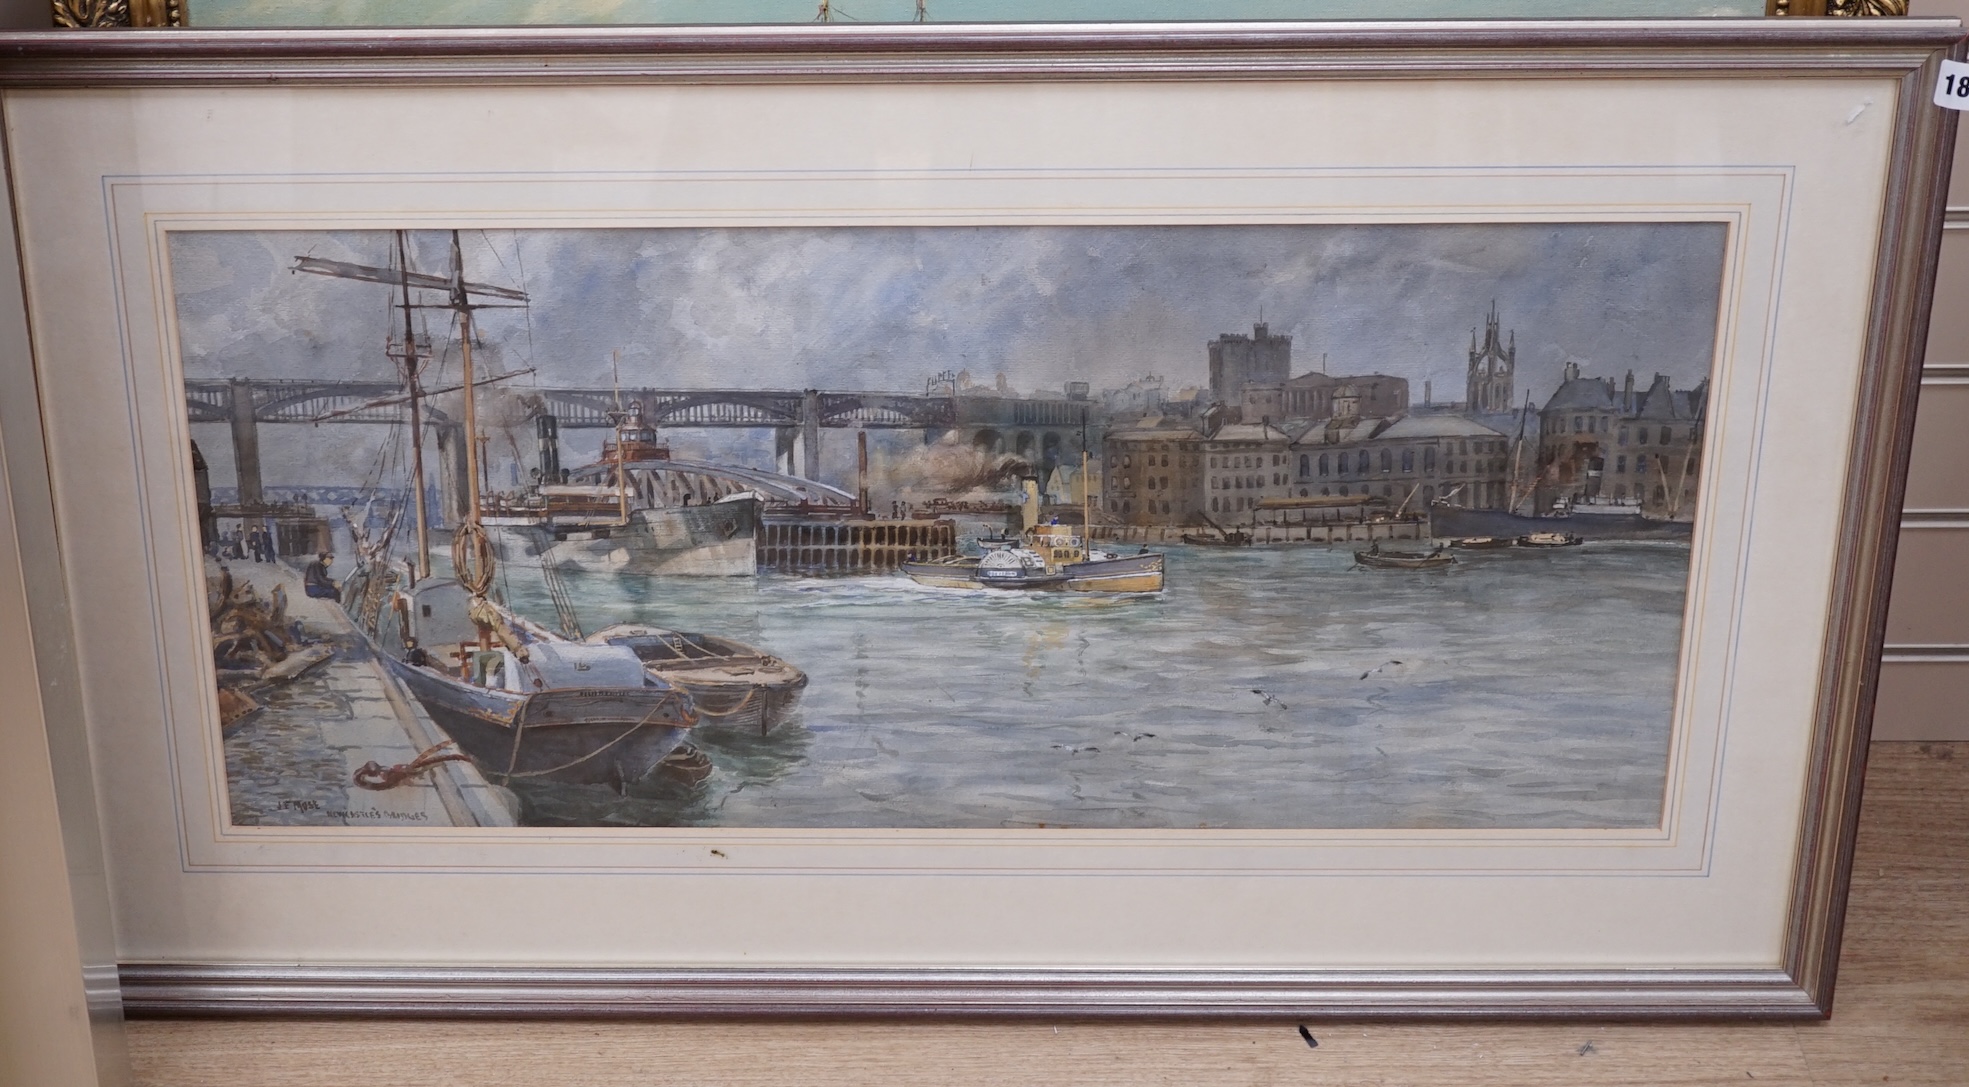 J.F. Muse, watercolour, 'Newcastle Bridges', signed and inscribed, 33 x 75cm. Condition - fair to good